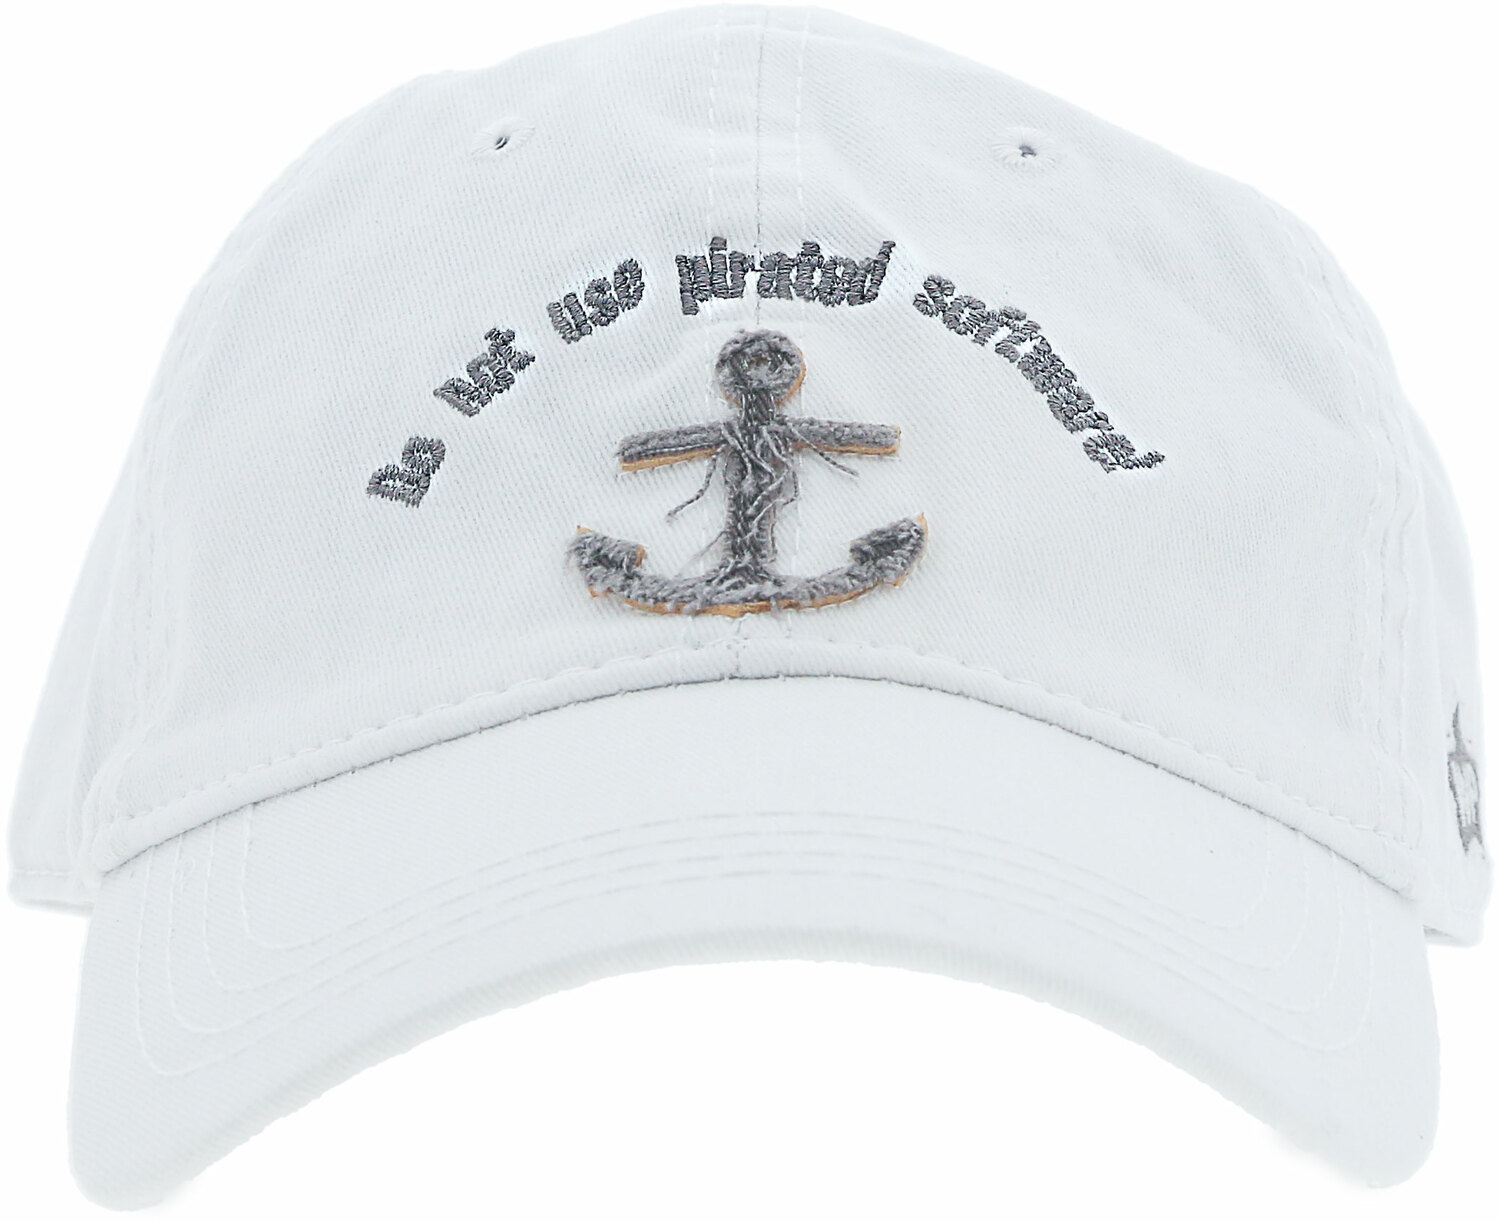 Pirated Software by Pavilion Accessories - Pirated Software - White Adjustable Hat